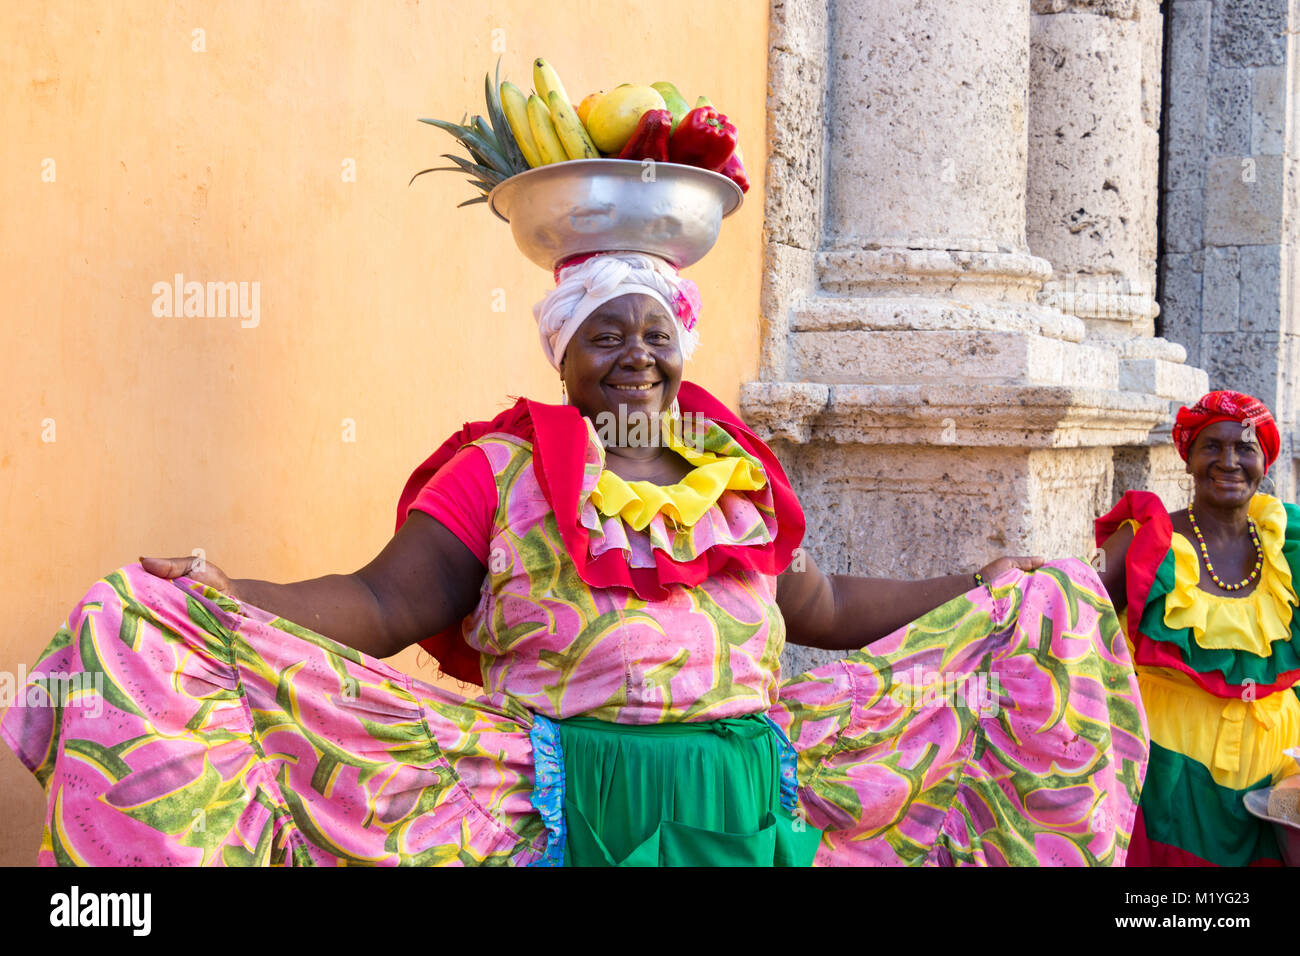 Cartagena, Colombia - January 23th, 2018: A woman palenquera with a metal basket with fruits posing showing her multicolor traditional dress at the ol Stock Photo